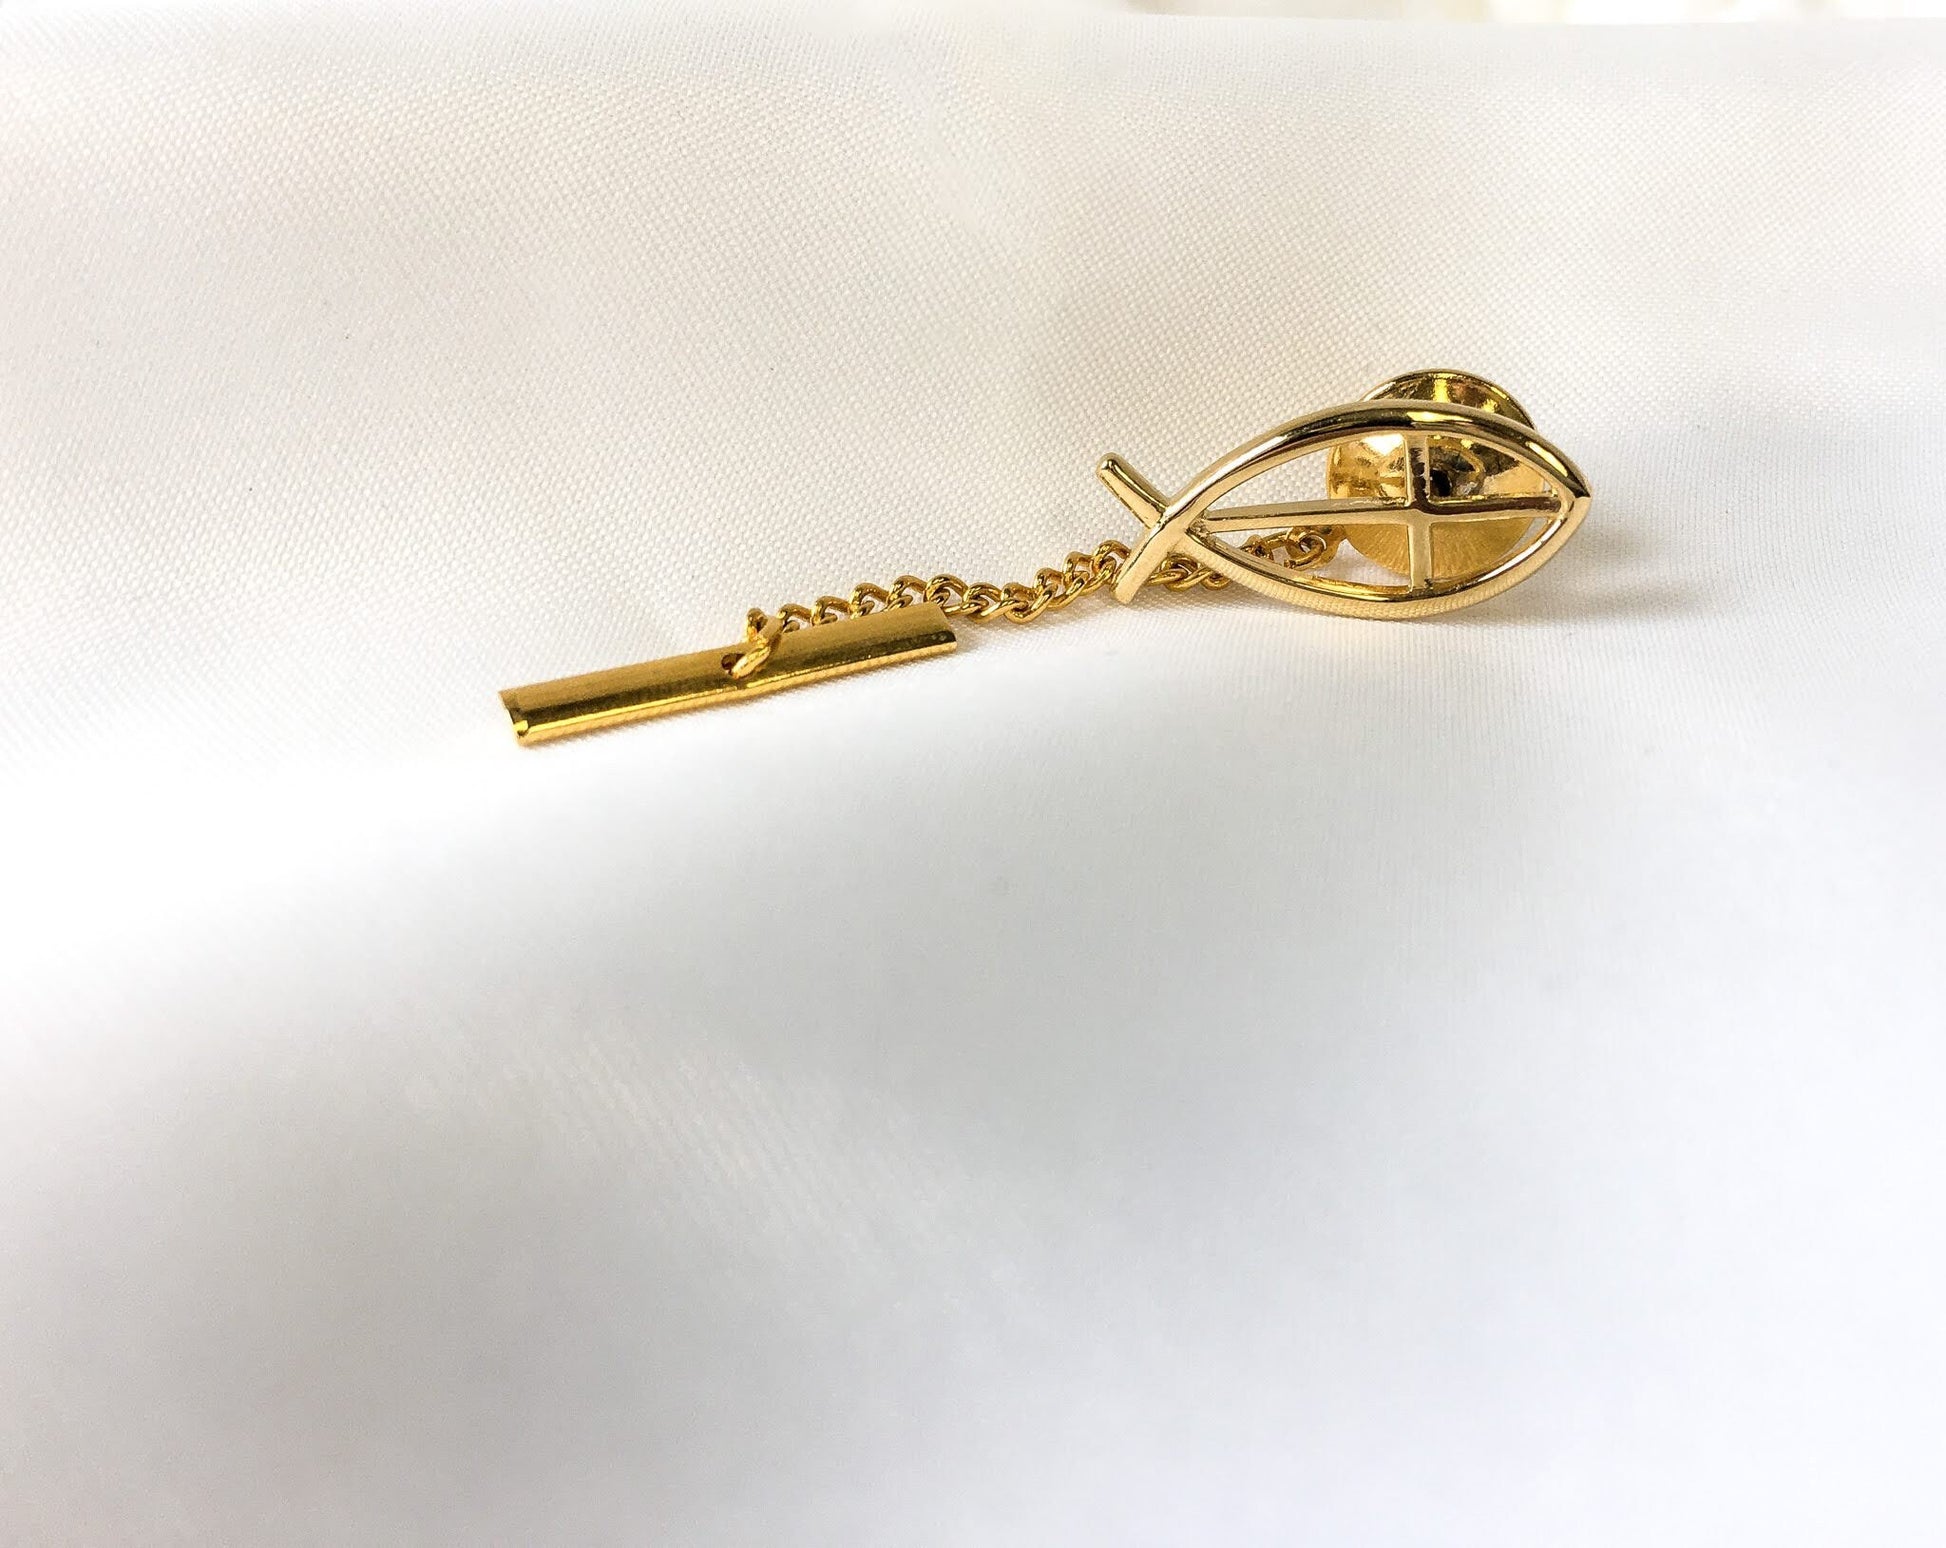 Vintage 12k Gold Filled THEDA Christian Fish, Ichthys, Tie Tack